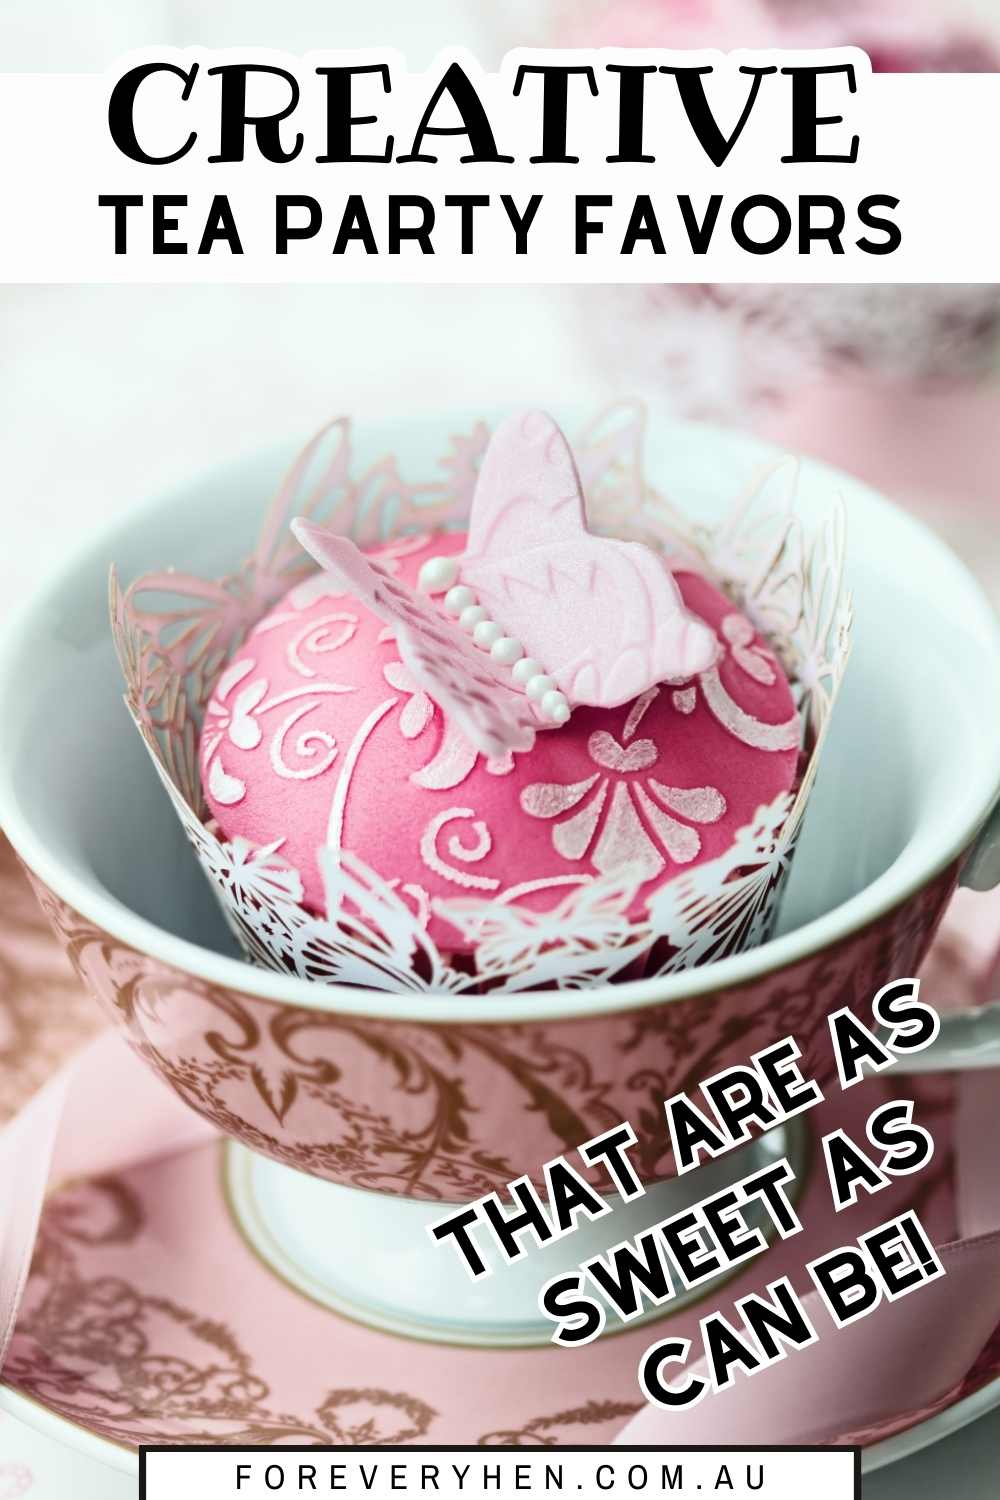 Image of a cupcake in a teacup. Text overlay: 30+ of the best tea party favor ideas (your guests will simply adore!)